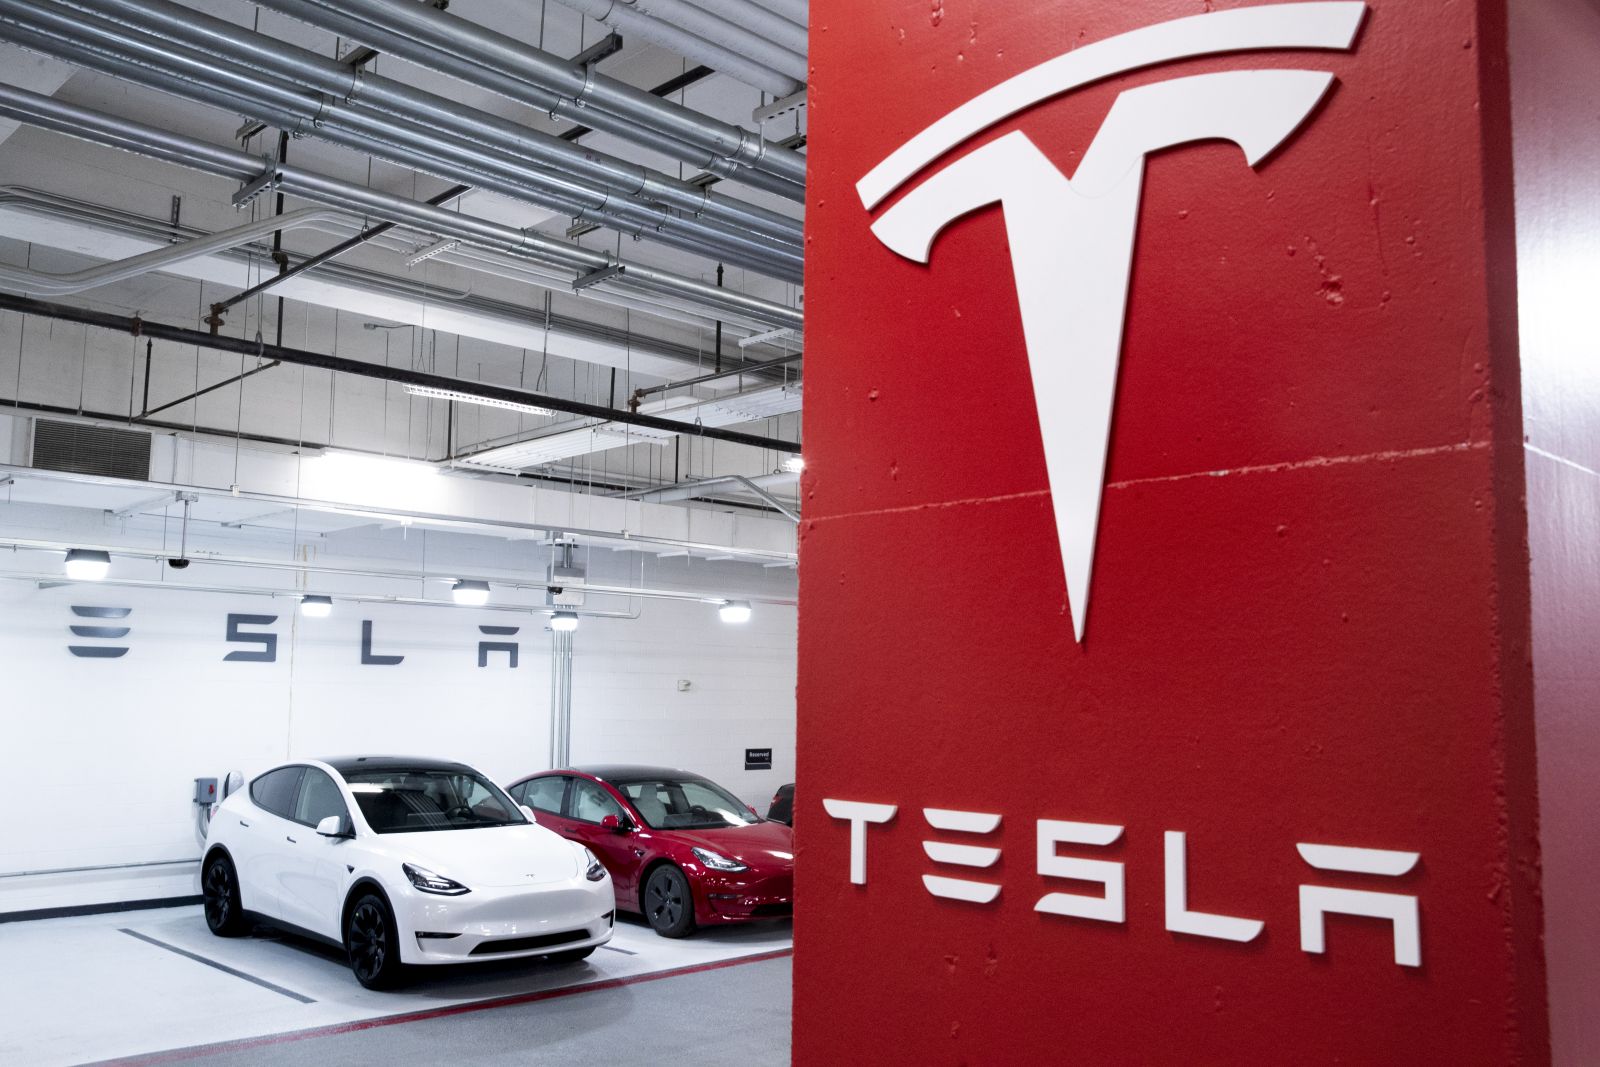 epa09546191 (FILE) - Tesla test-drive vehicles that are used by a Tesla dealership are seen charging in a garage in Washington, DC, USA, 08 February 2021 (reissued 26 October 2021). Tesla's market value rose past 1 trillion US dollar on 25 October, after US rental car company Hertz agreed to purchase 100,000 Tesla Model 3 automobiles.  EPA/MICHAEL REYNOLDS